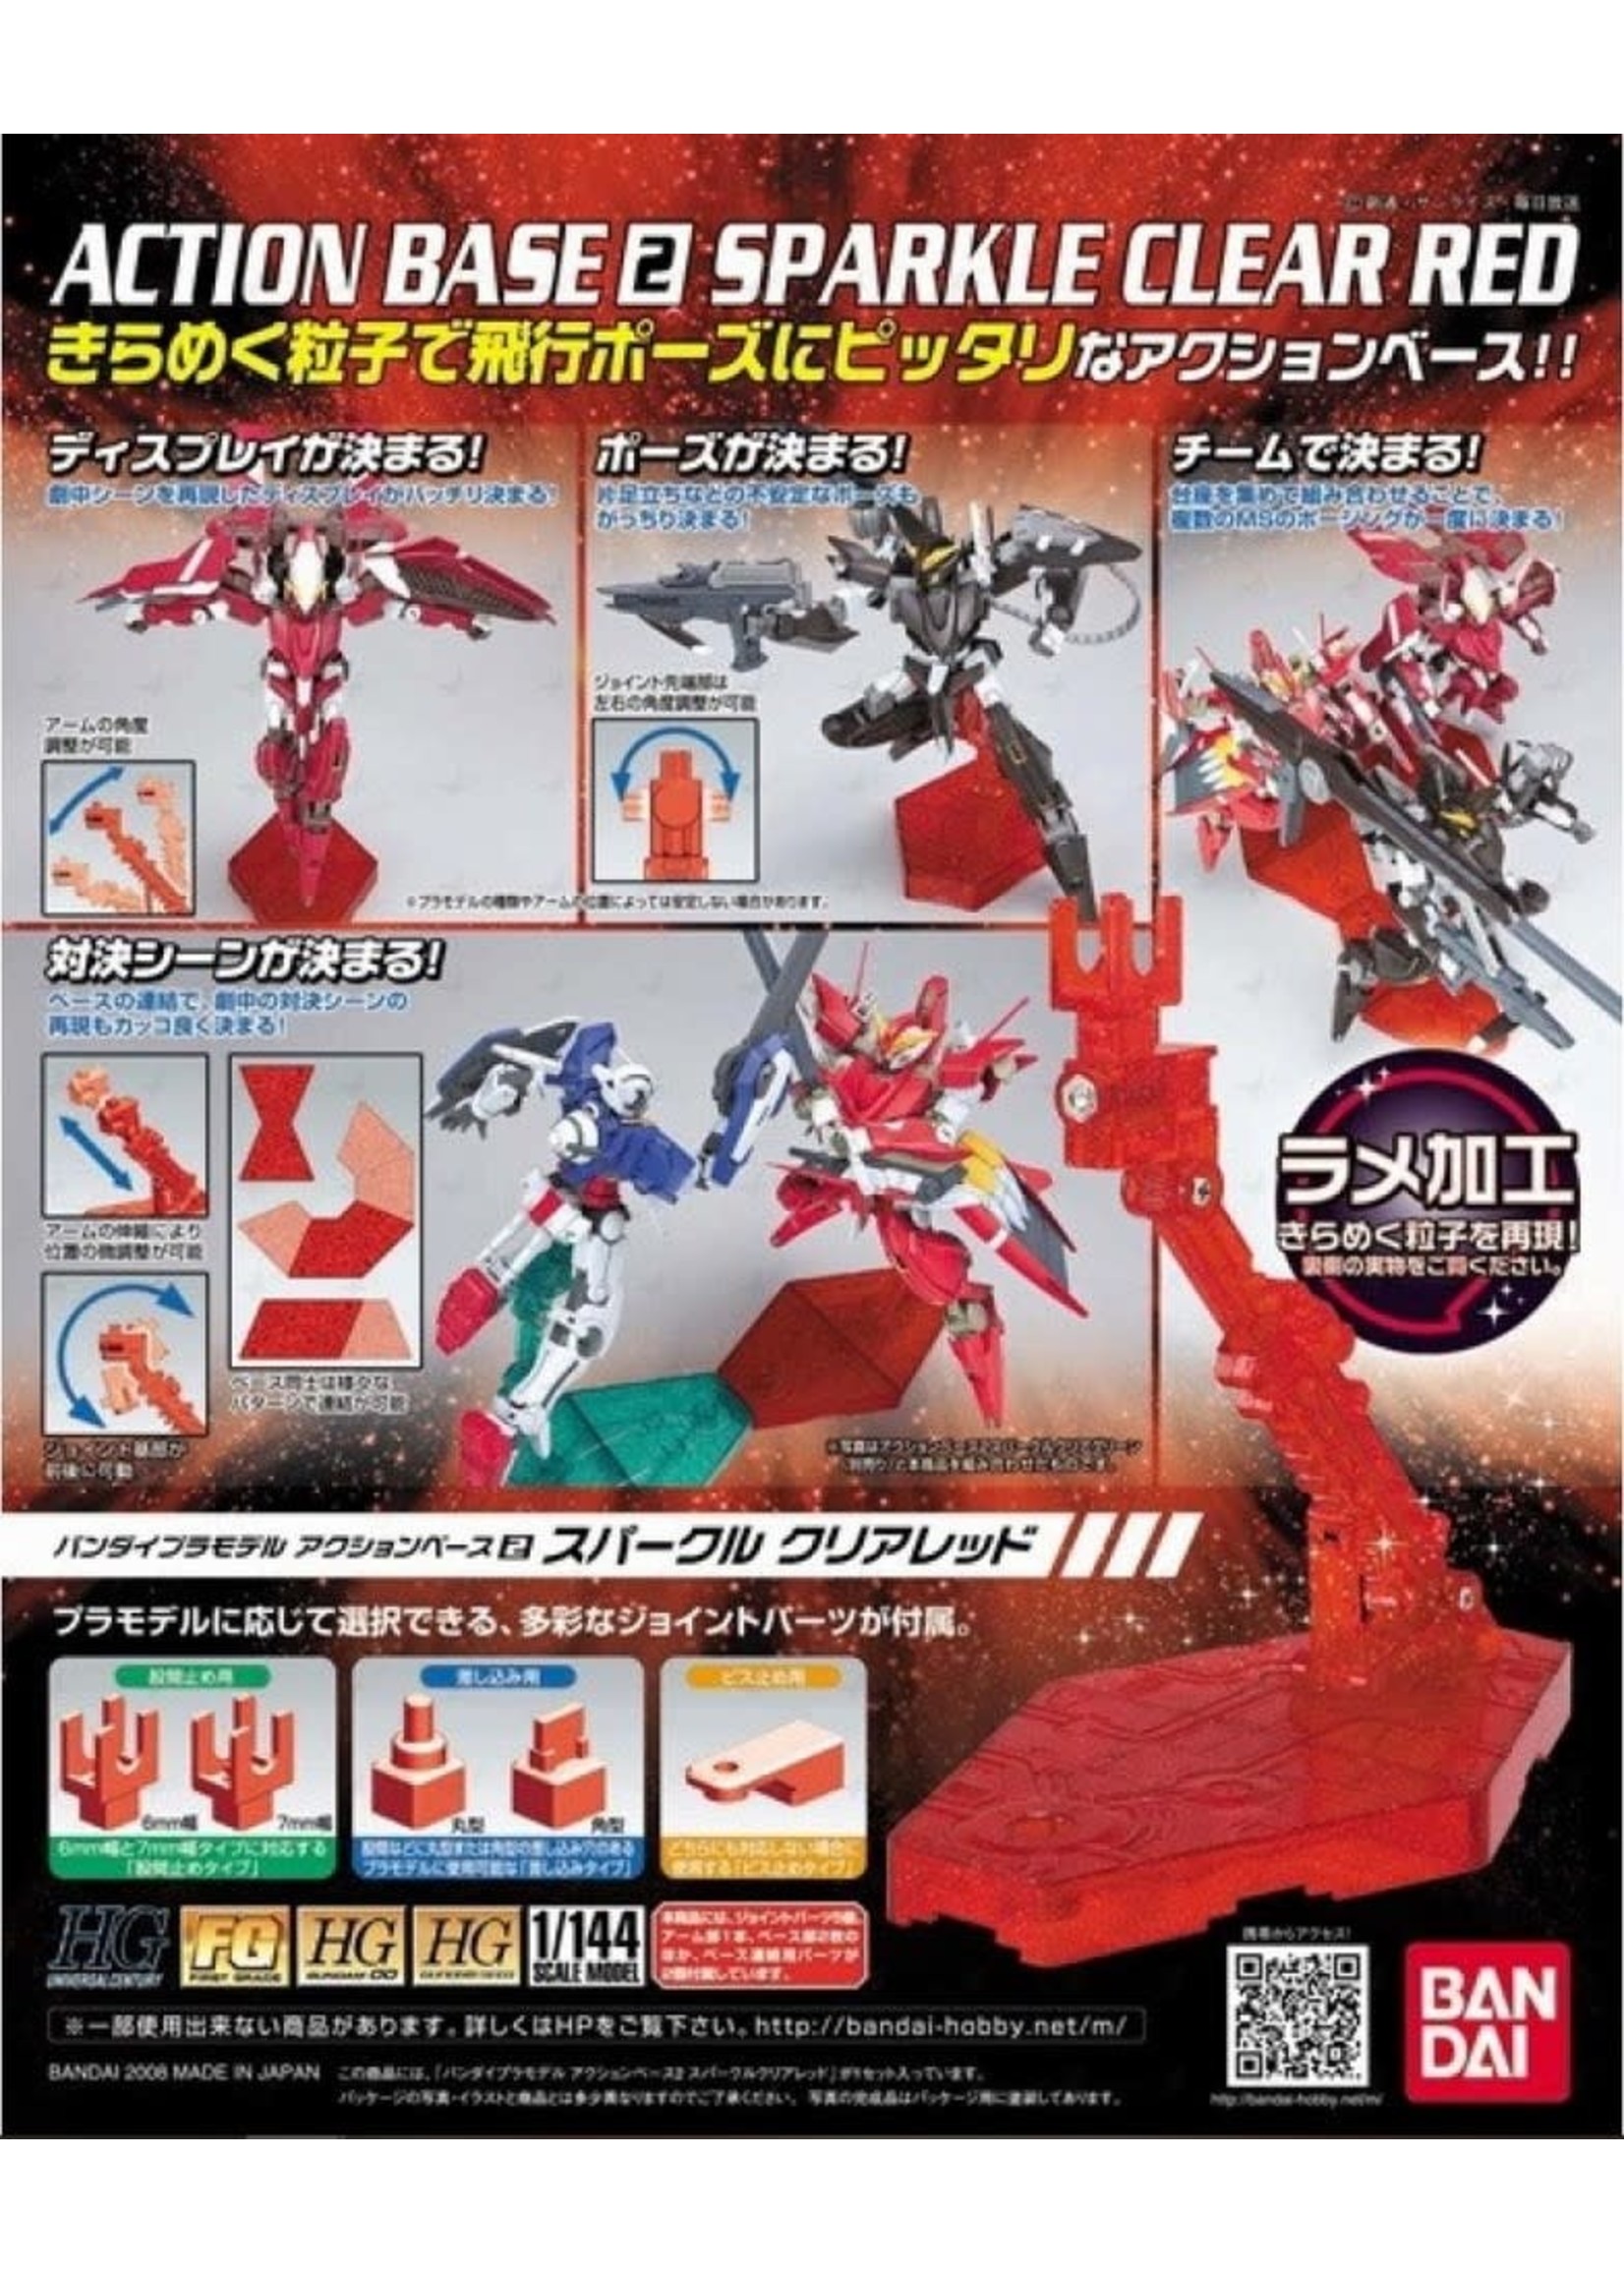 BANDAI ACTION BASE 2 SPARKLE CLEAR RED